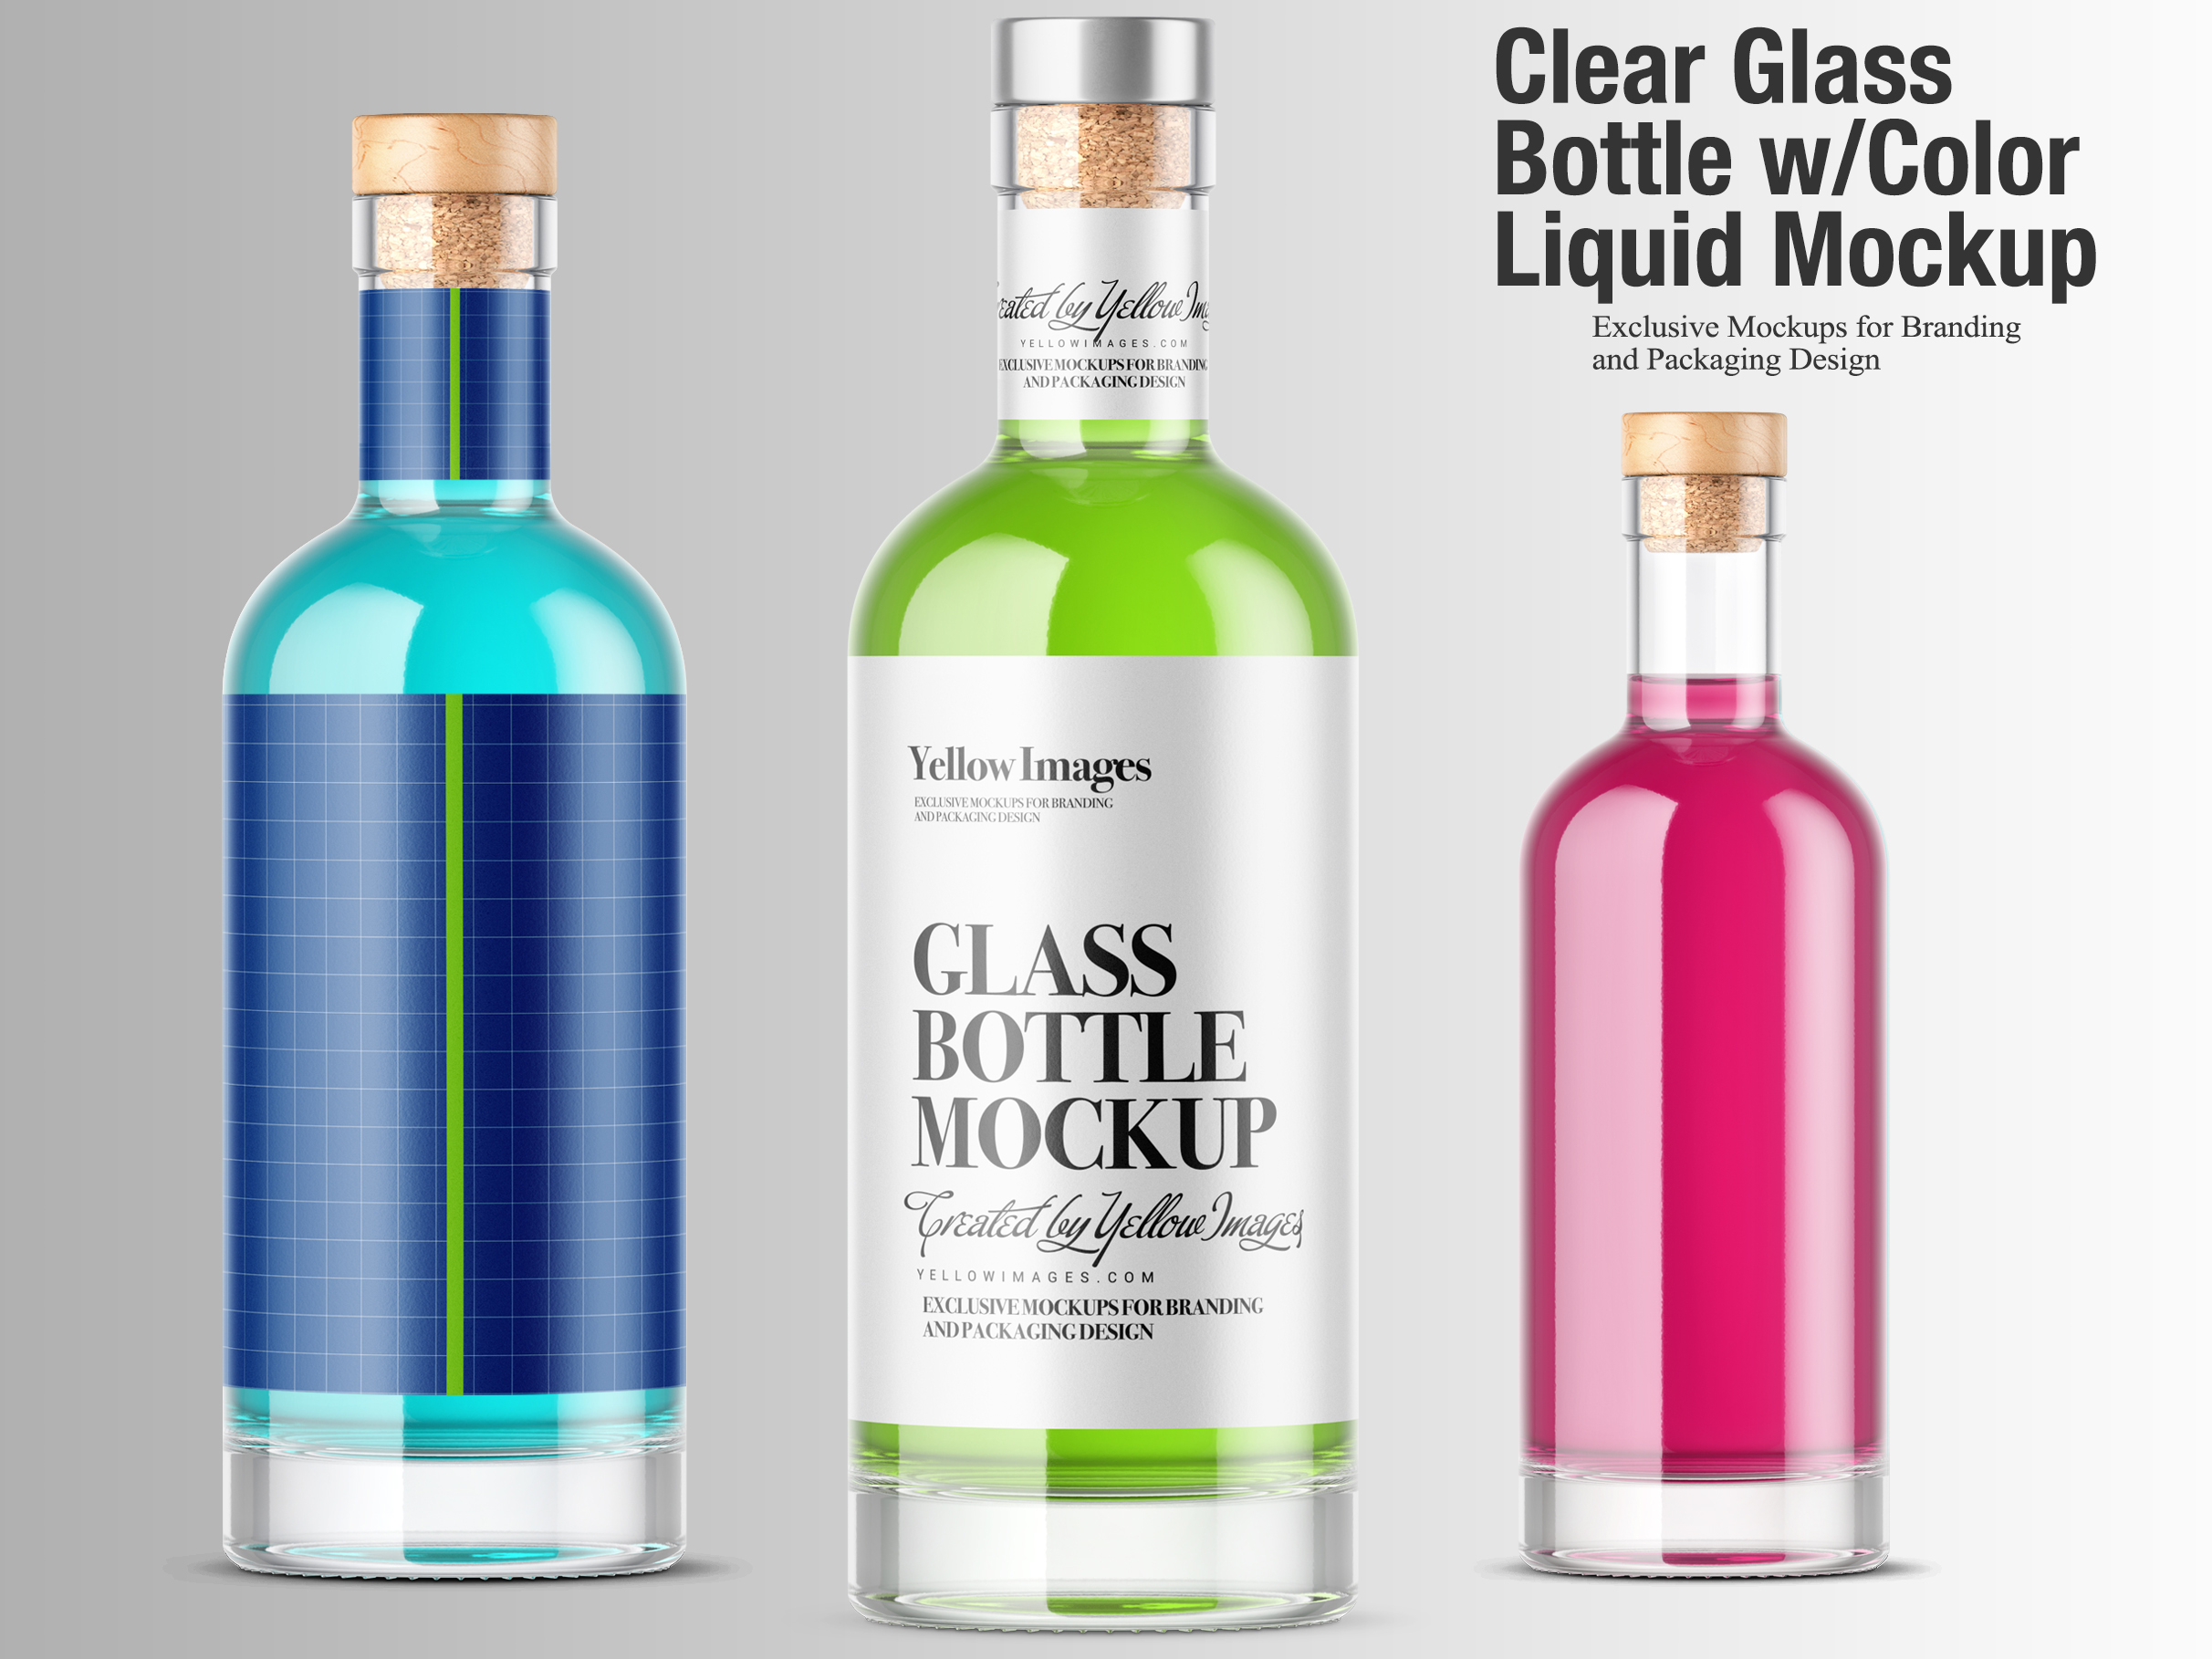 Download Bottle Close Up Mockup Download Free And Premium Psd Mockup Templates And Design Assets Yellowimages Mockups